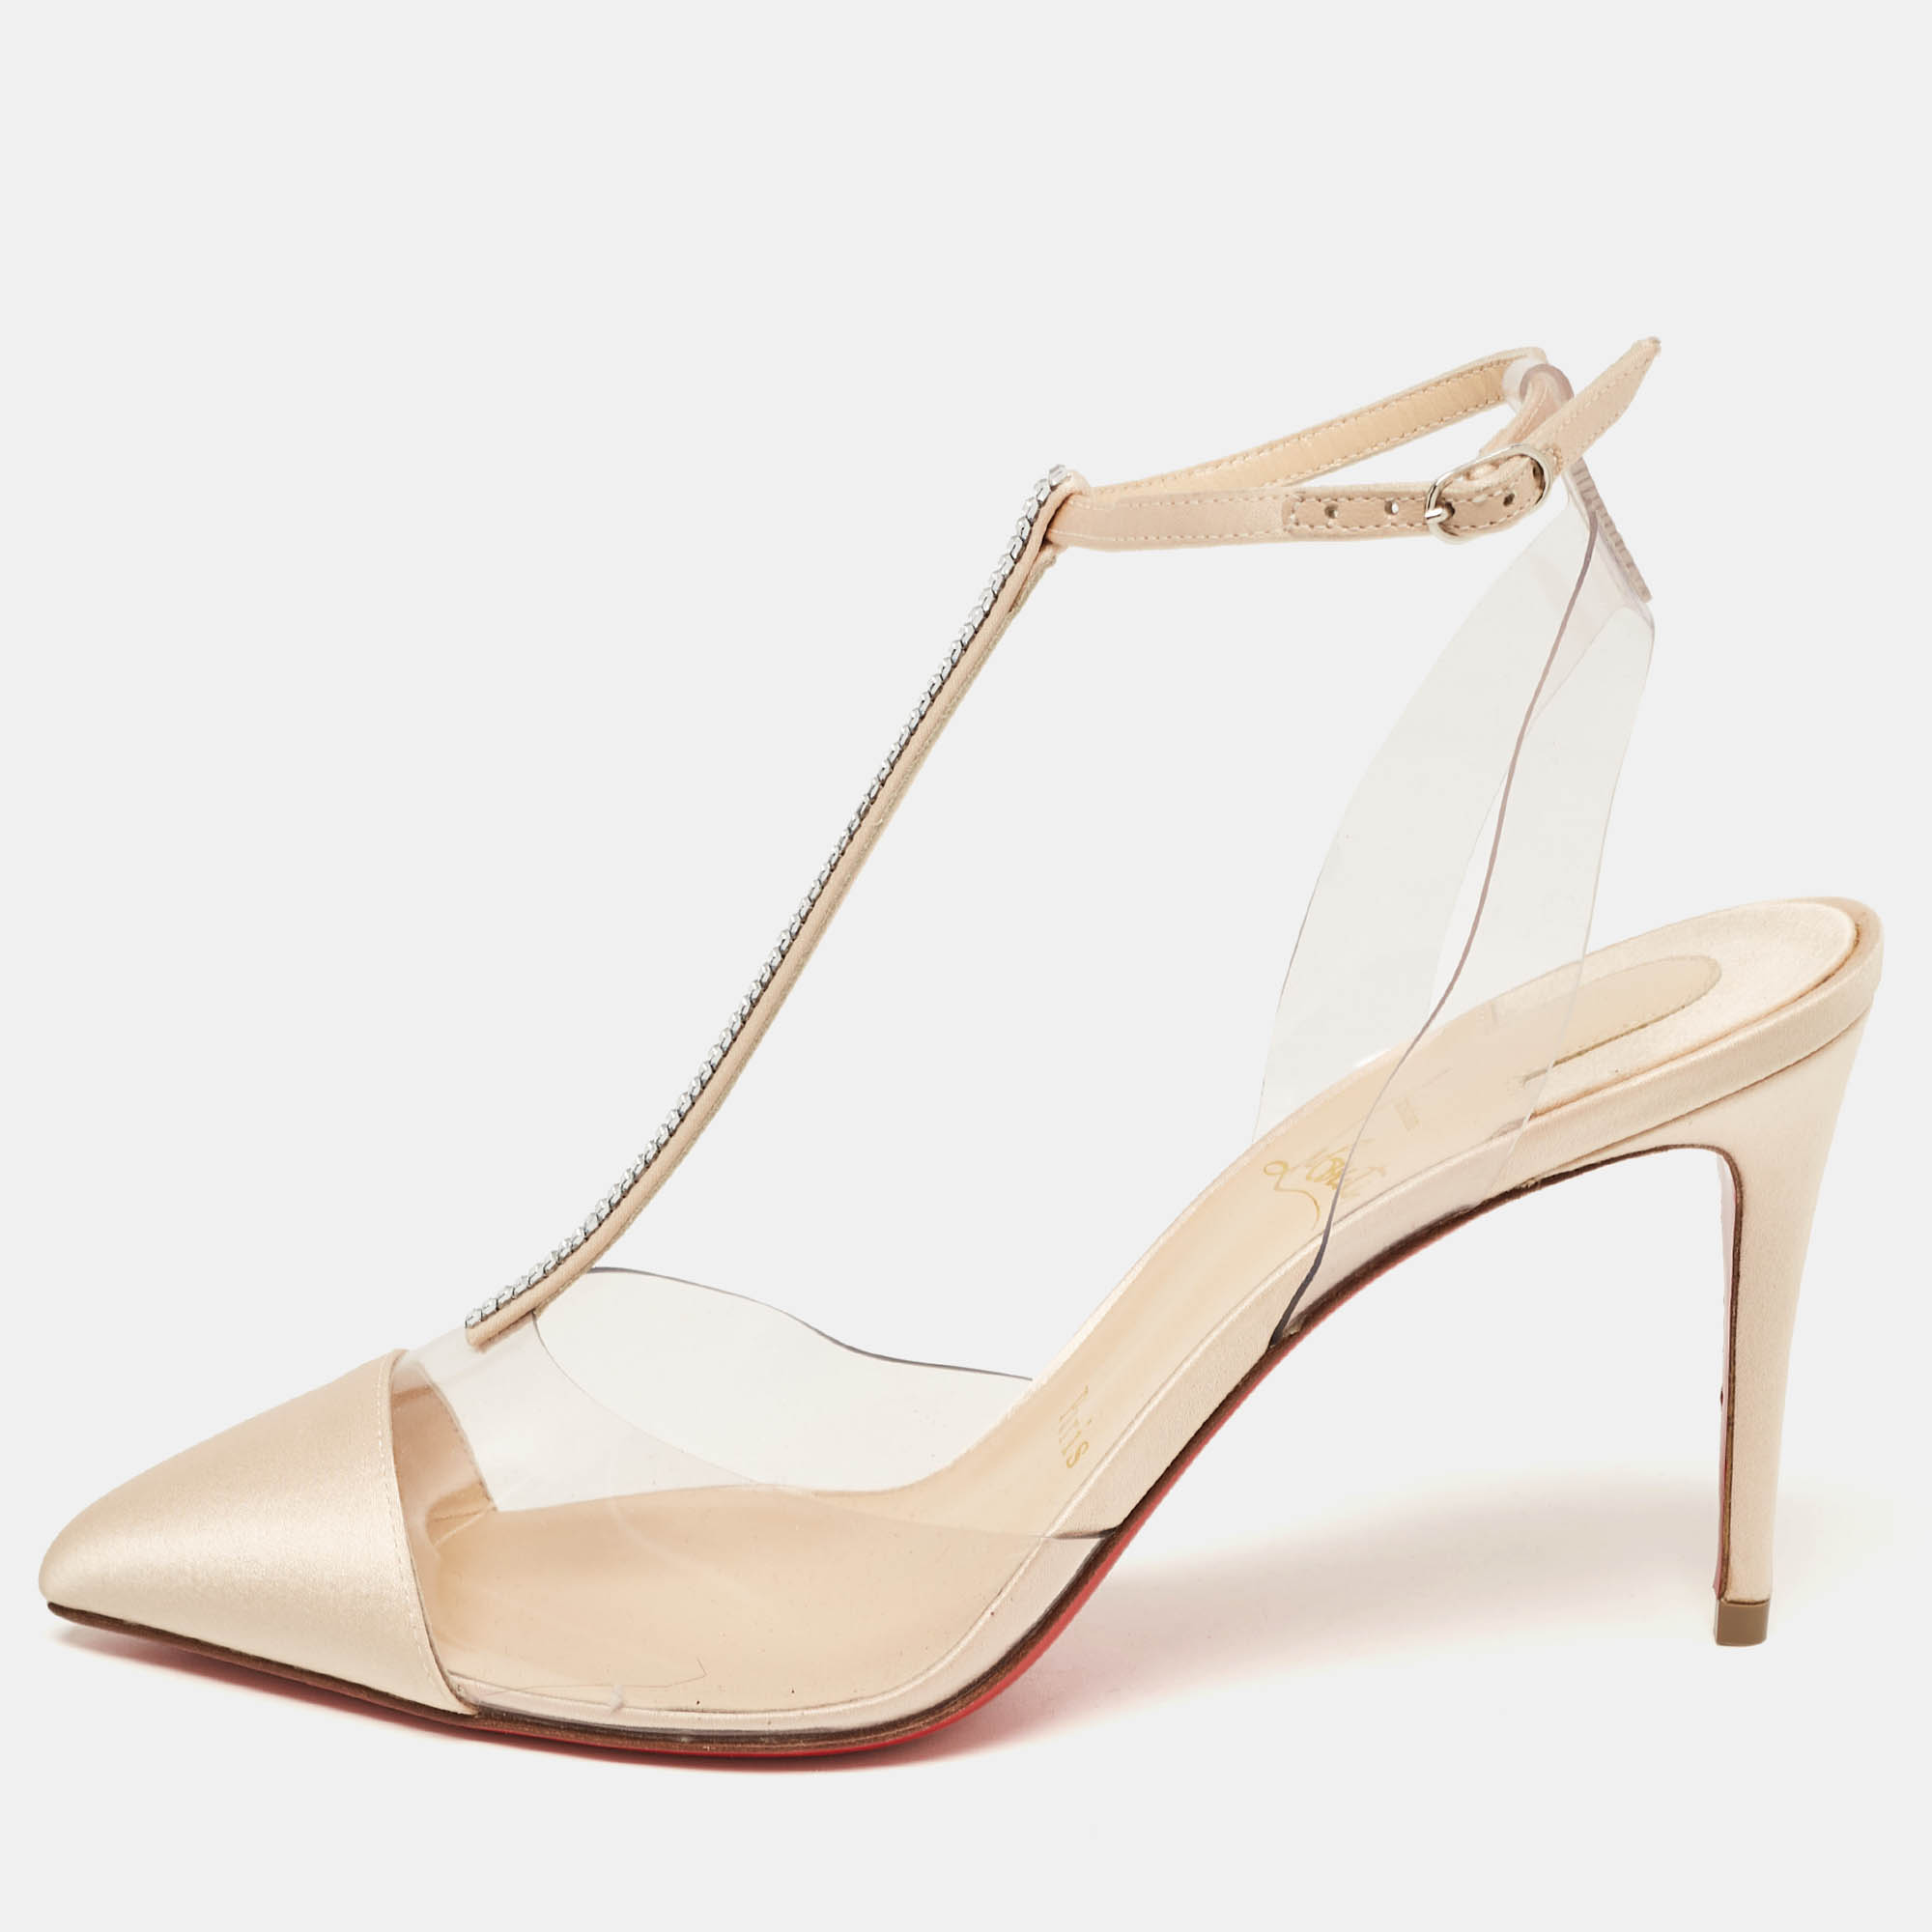 Pre-owned Christian Louboutin Beige Pvc And Satin Nosy Ankle Strap Pumps Size 37.5